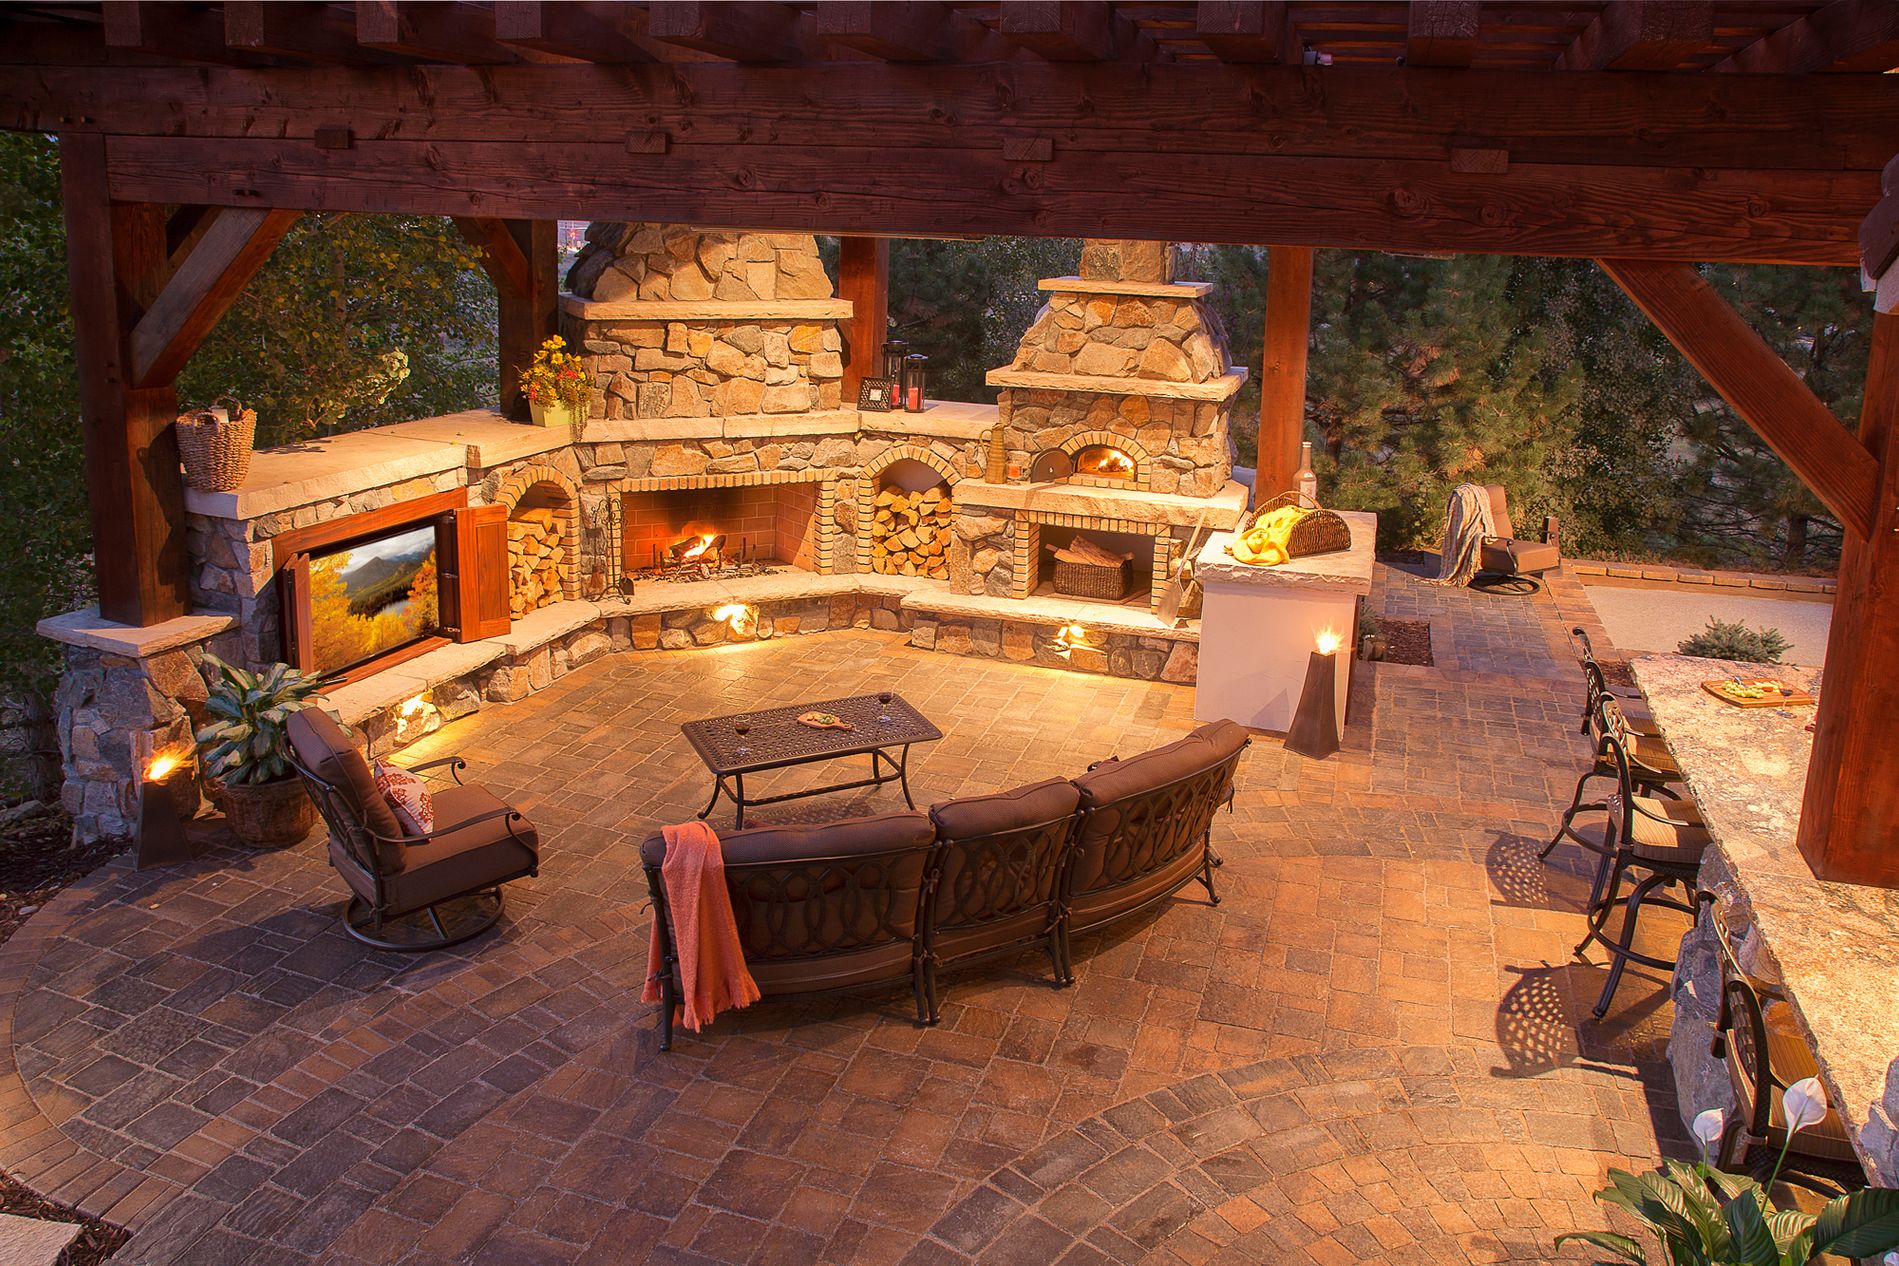 Outdoor fireplace, pizza oven, kitchen, and theater, with paver patios